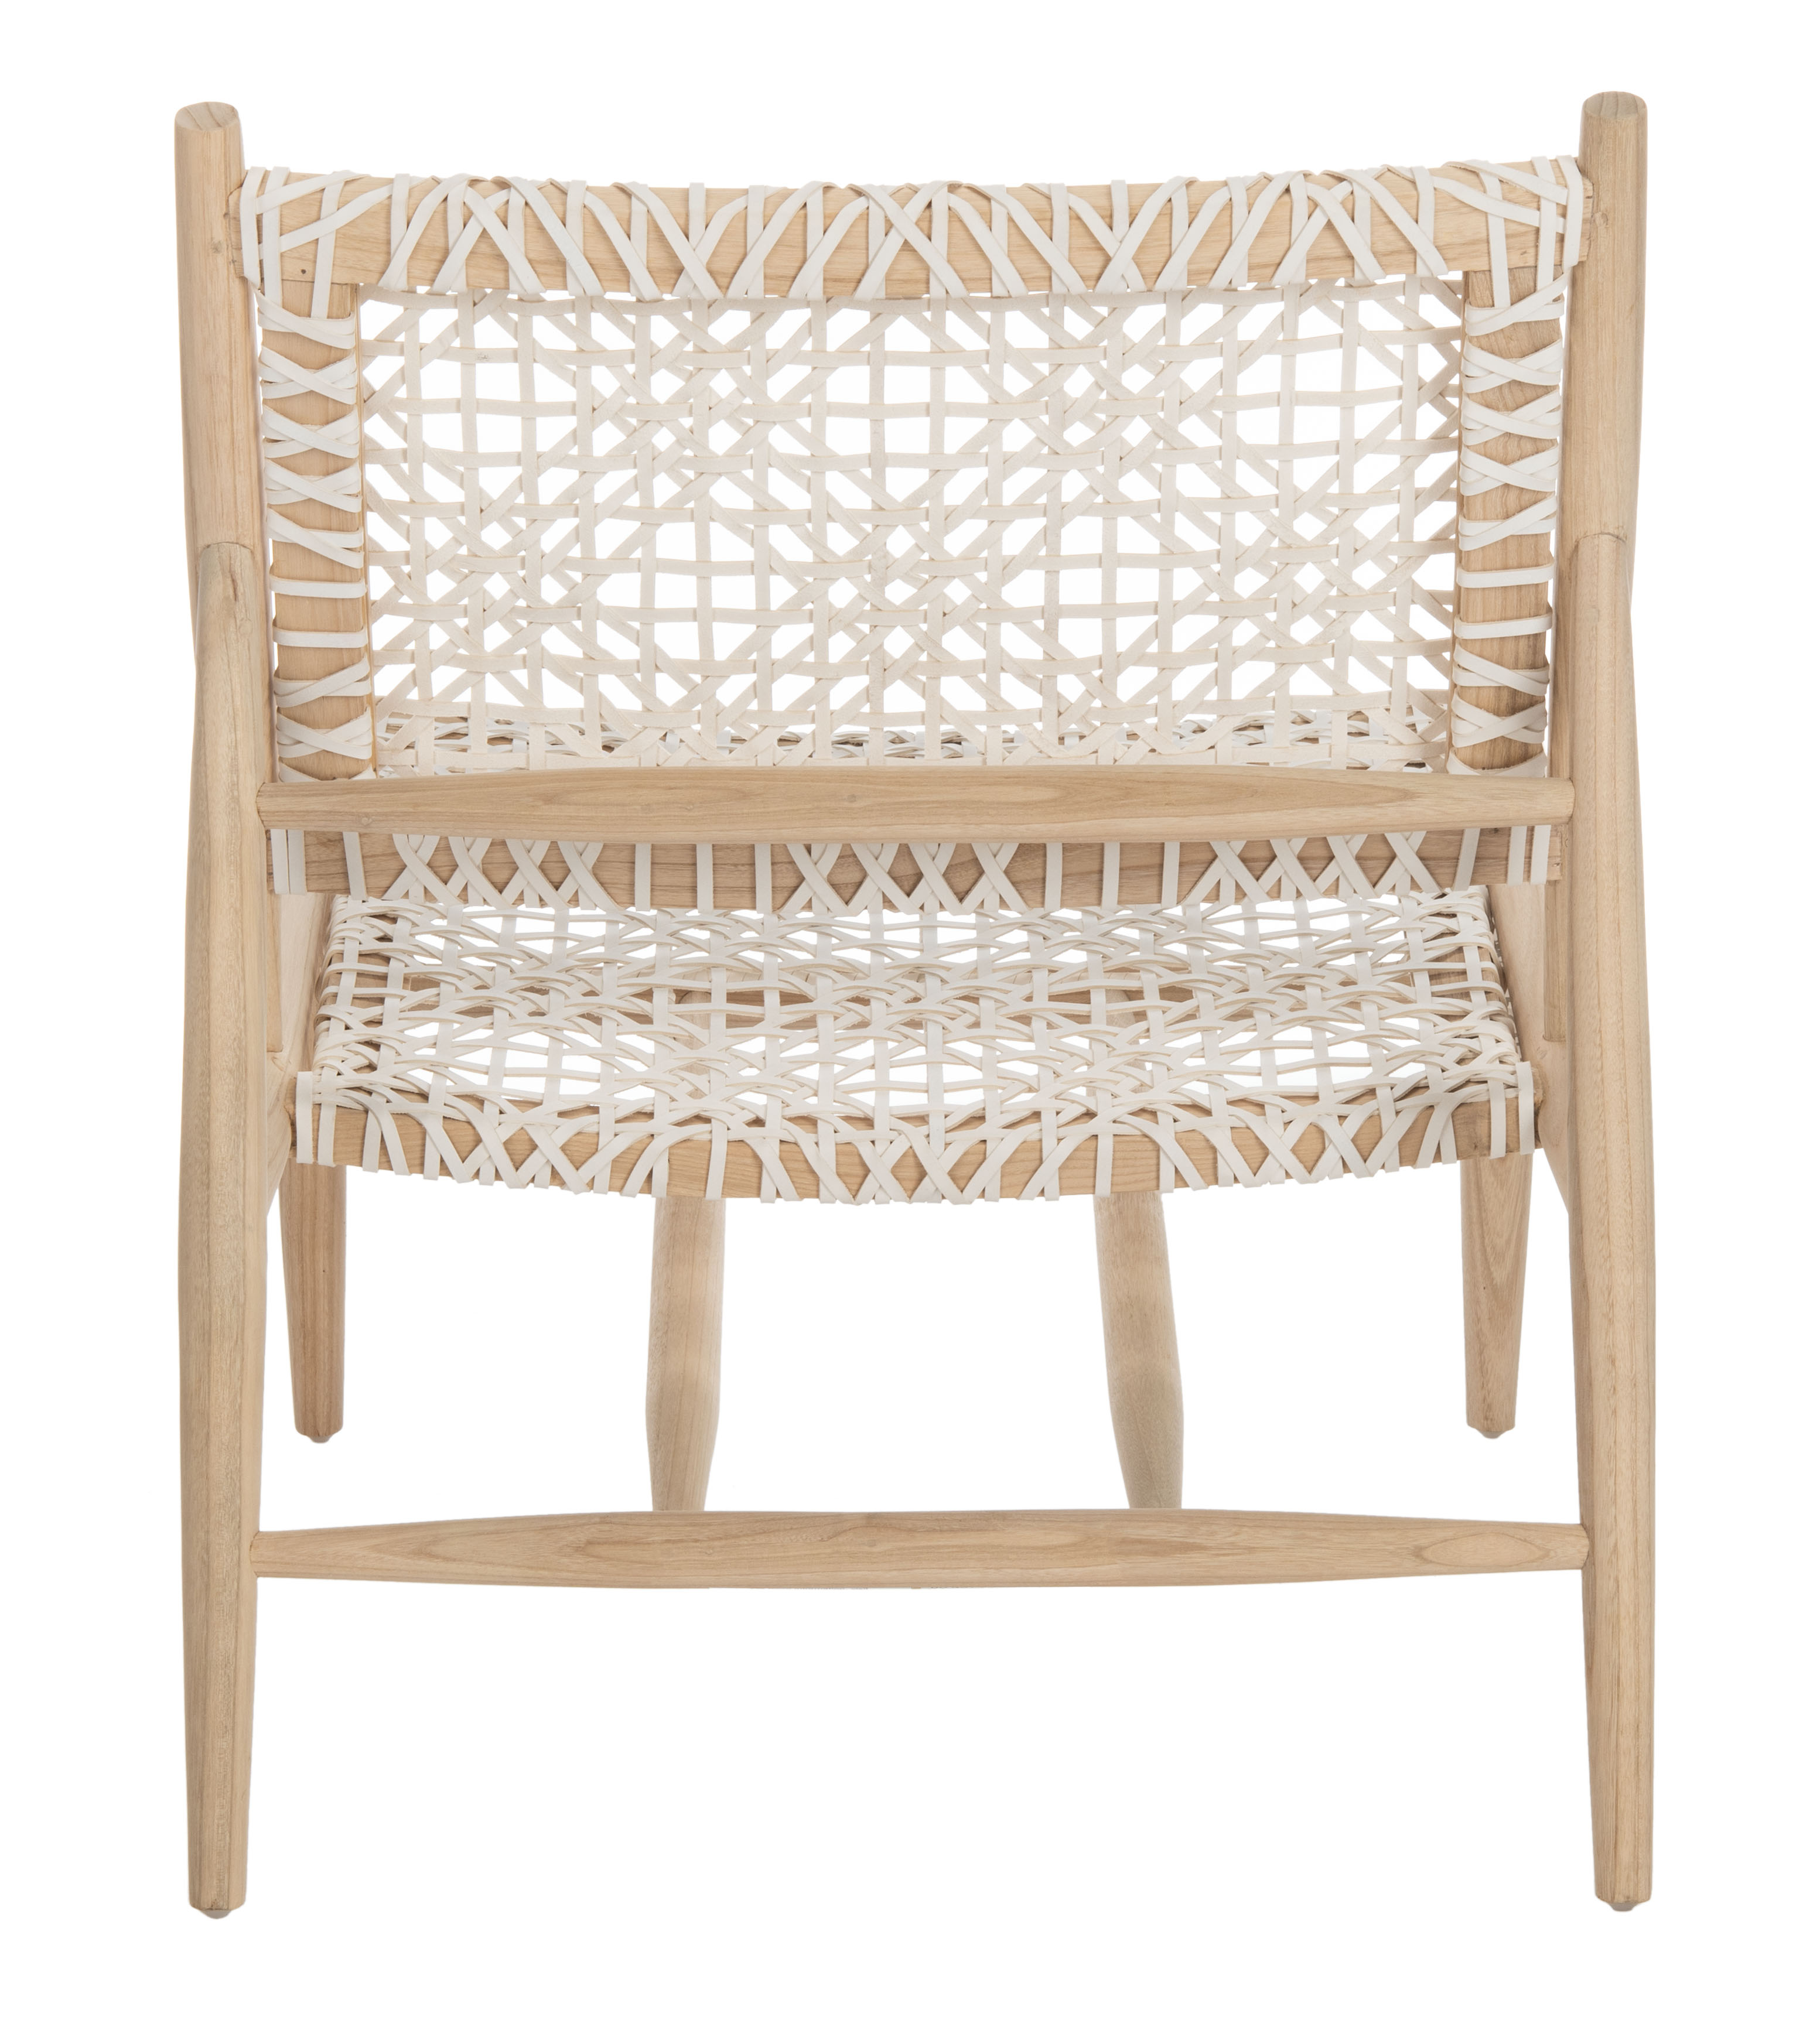 SAFAVIEH Bandelier Leather Weave Nautical Club Chair, Natural/White - image 6 of 11